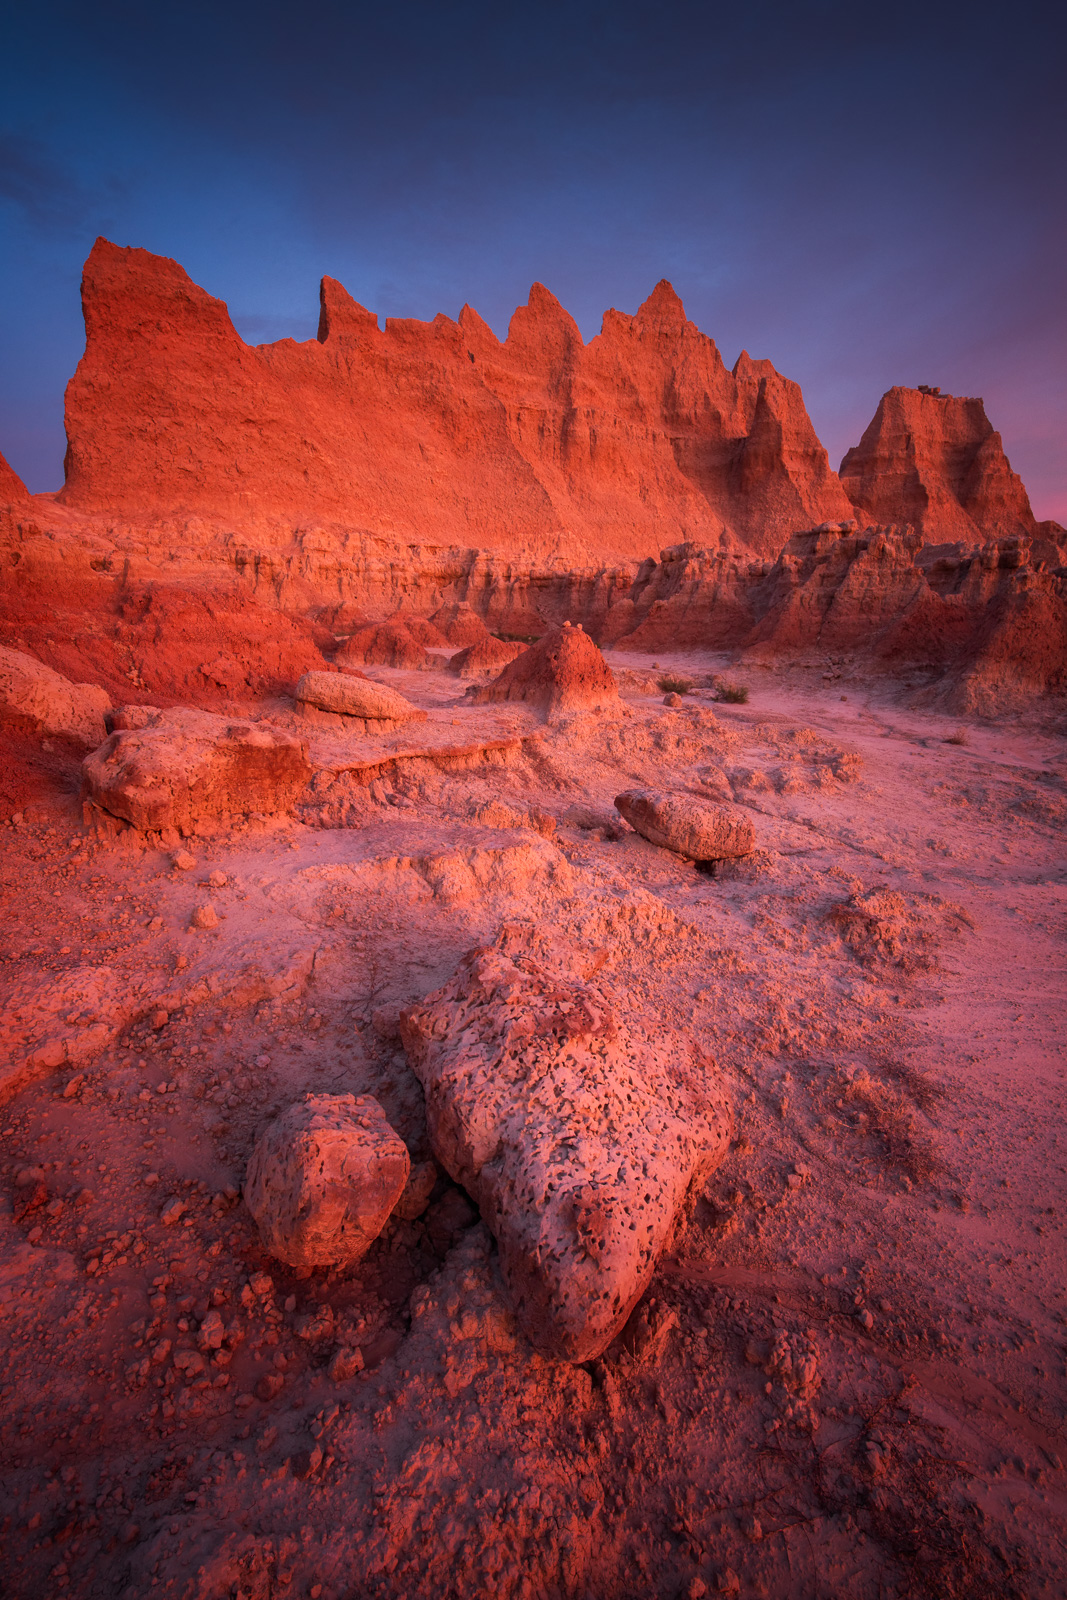 Morning light on the towers of Badlands National Park.